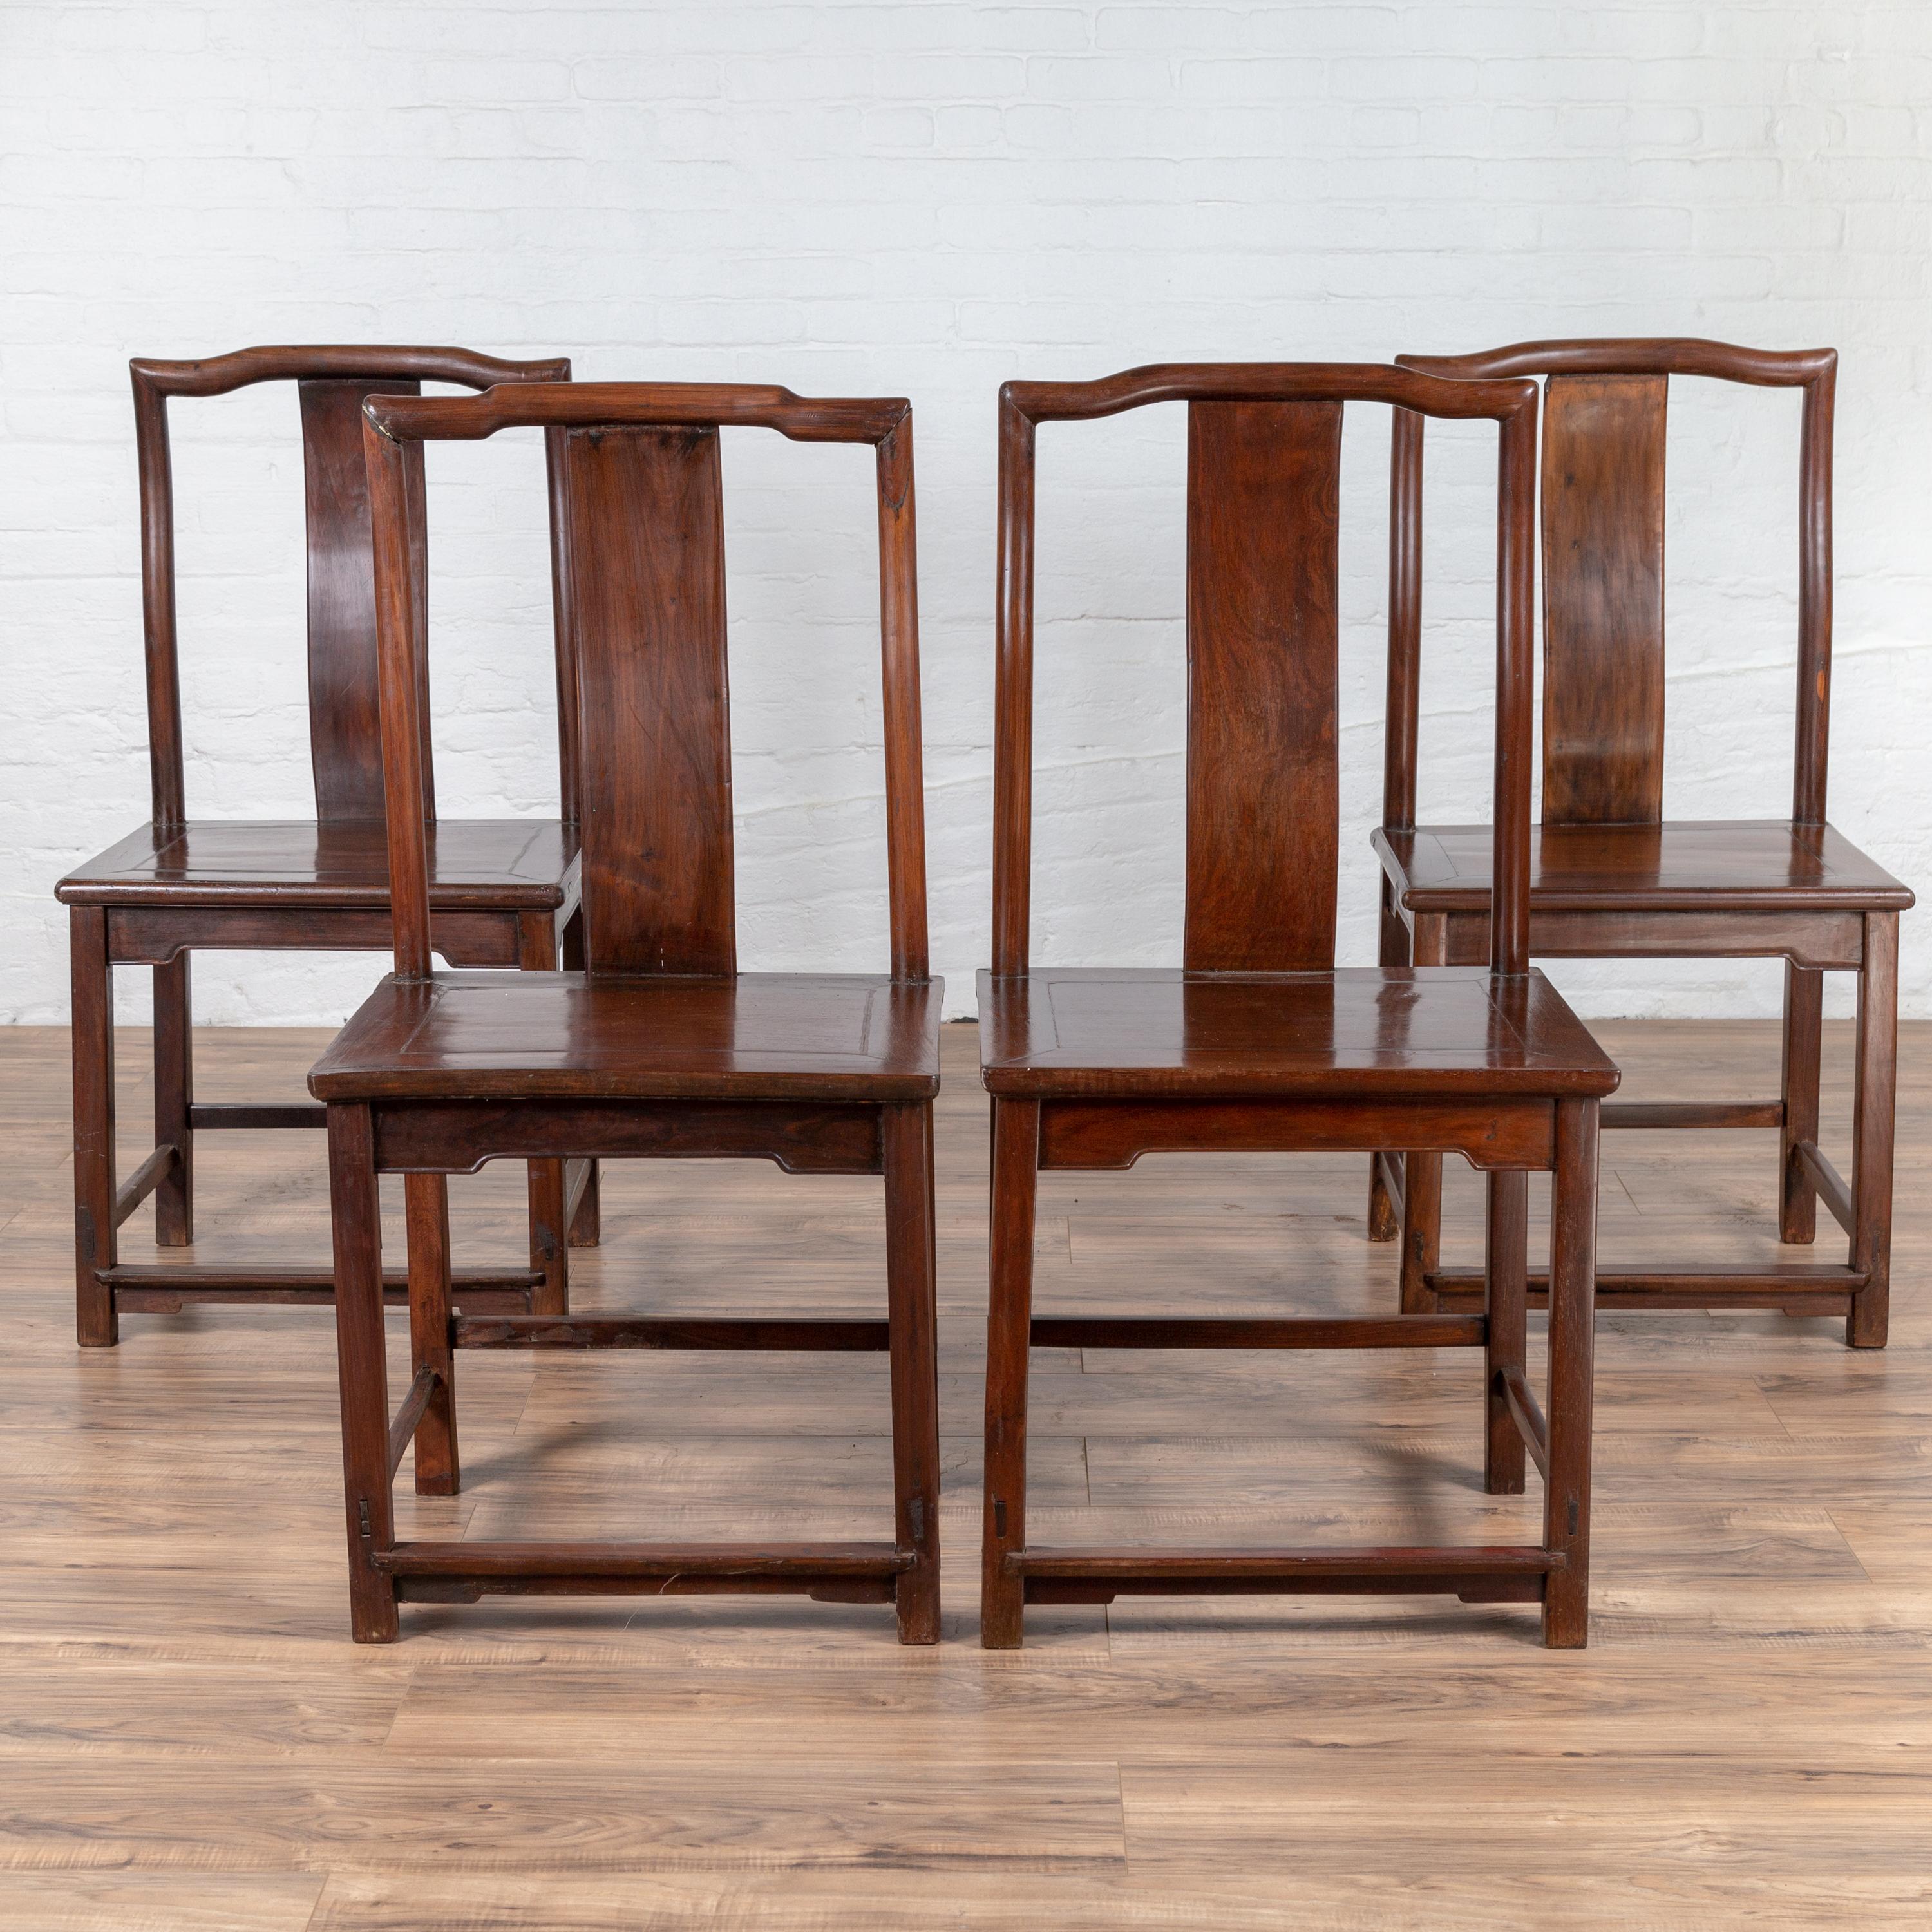 A set of four antique Chinese elmwood scholar's ceremonial side chairs from the early 20th century, with dark patina and sinuous back splats, all with slight variations. Born in China during the early years of the 20th century, each of this set of